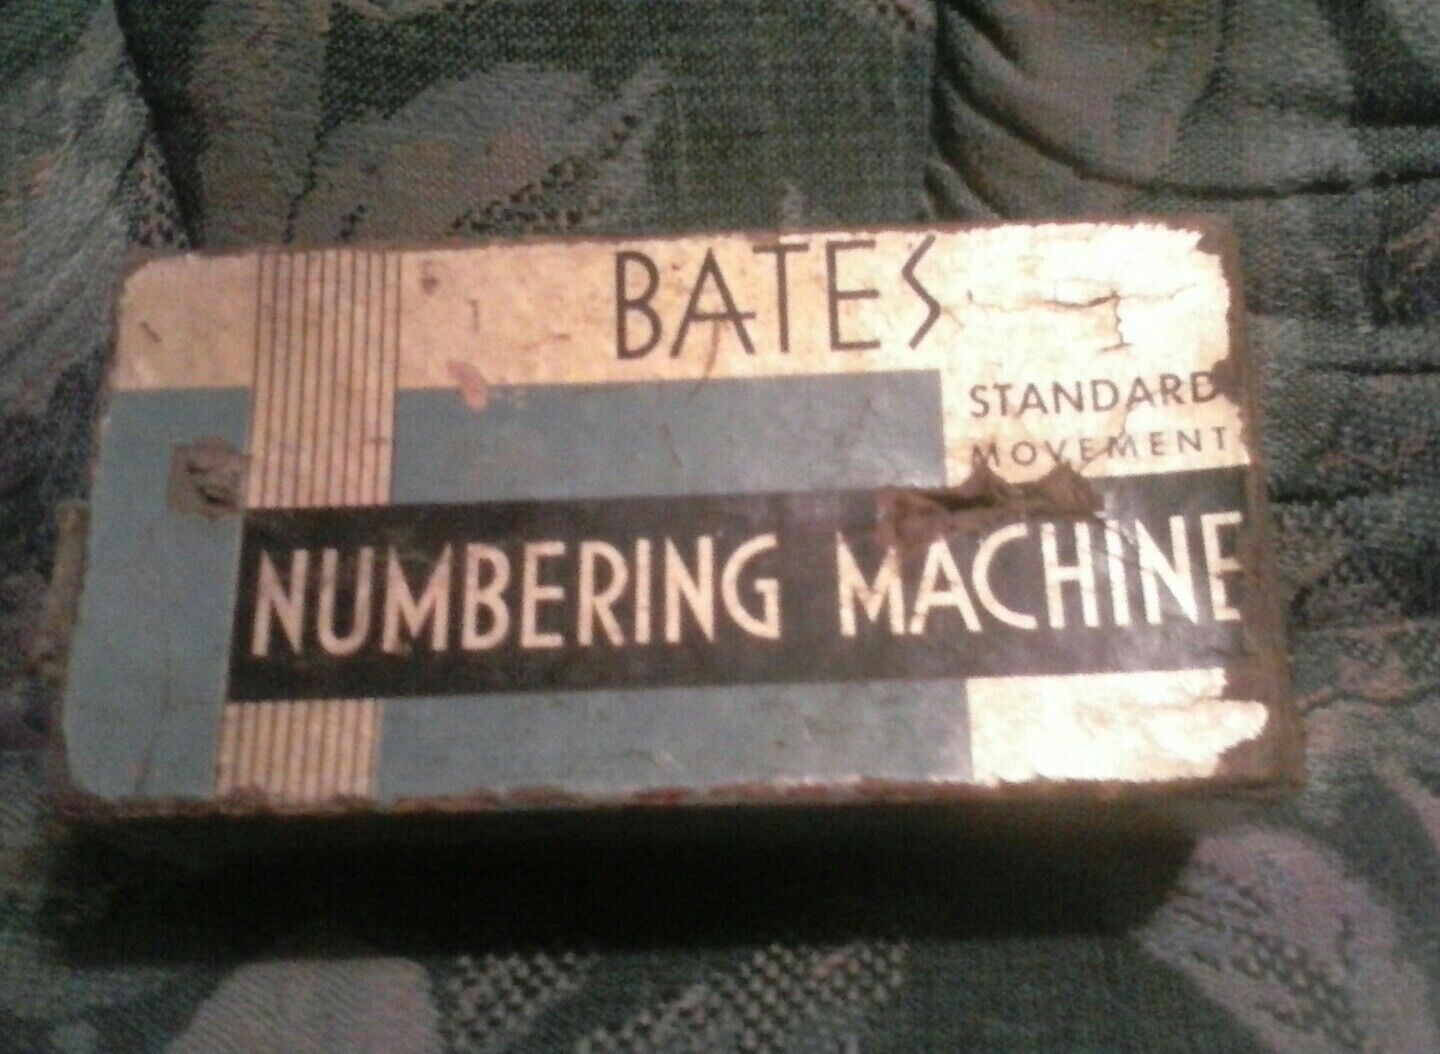  BATES Numbering Machine Multiple 4 Movement 6 Wheel Style E in Box ( Vintage )